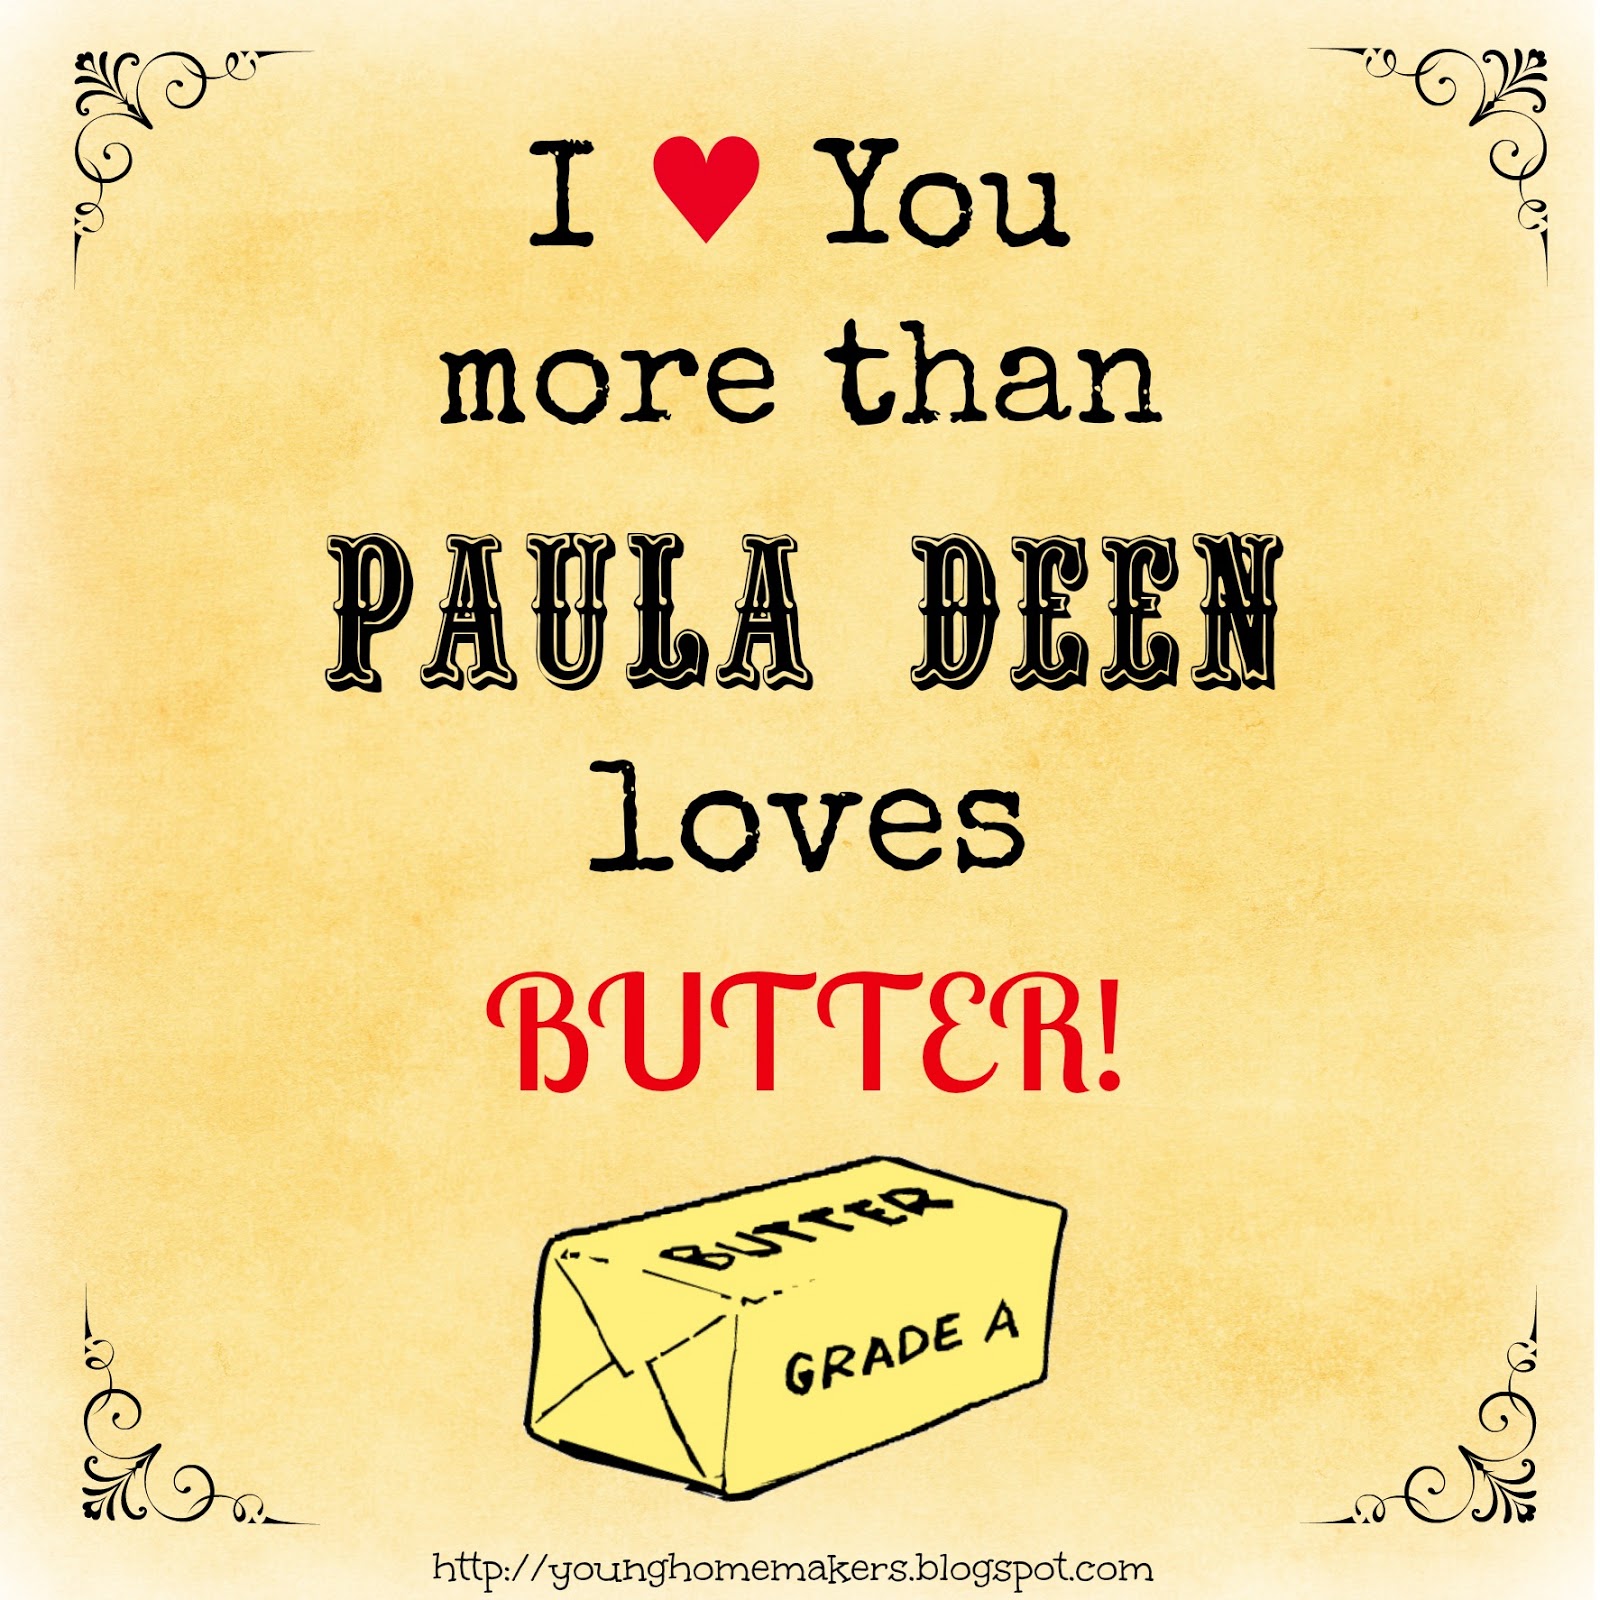 You know how much Paula Deen loves Butter!